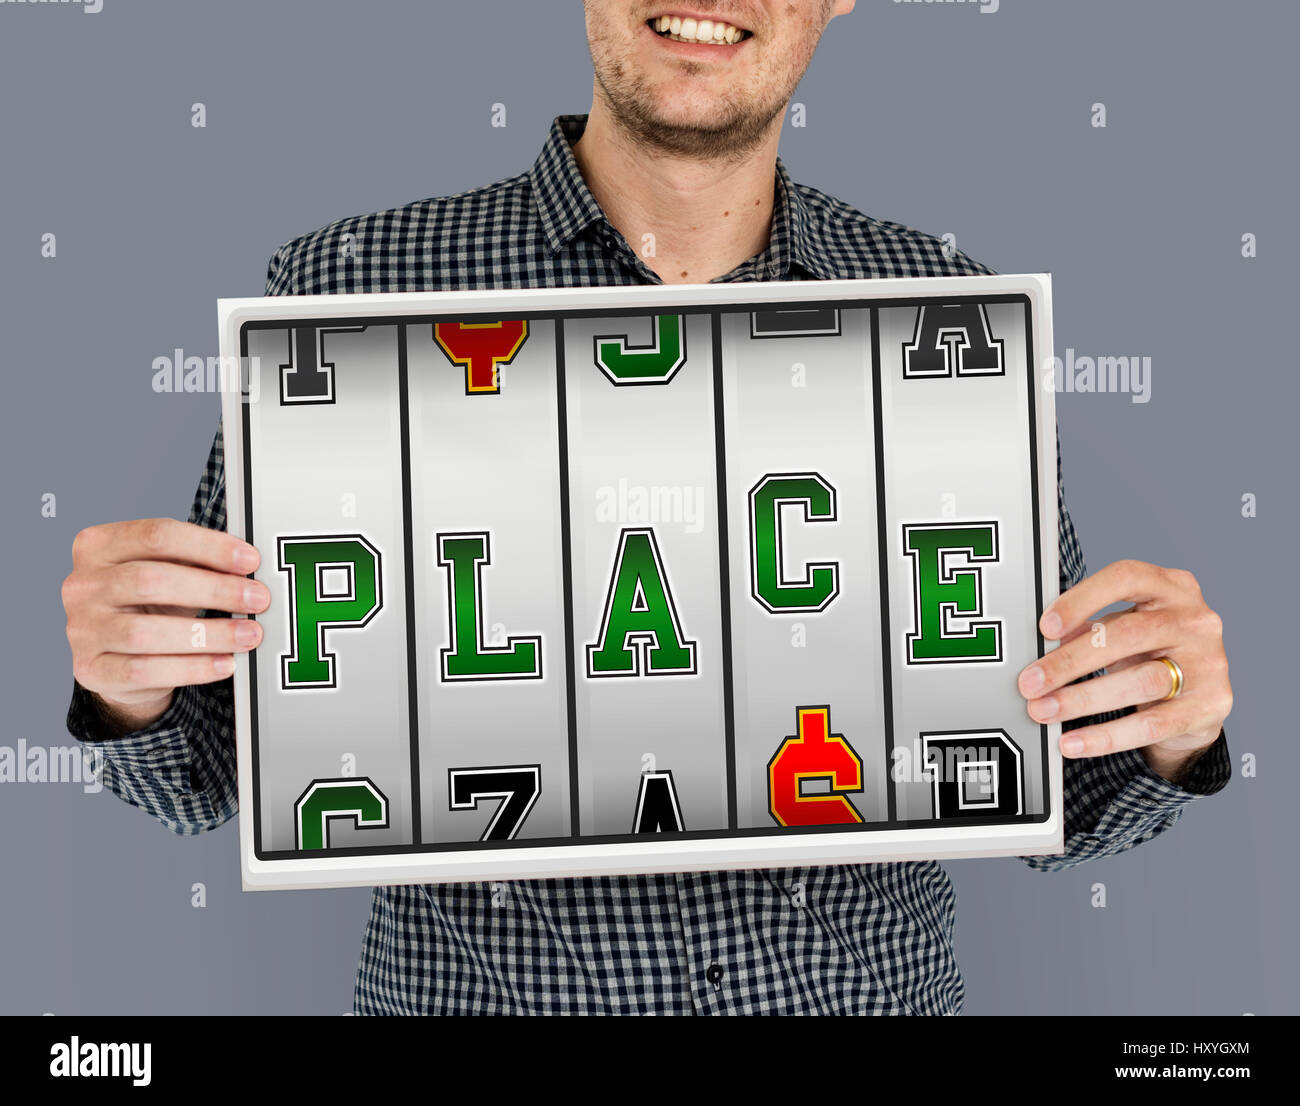 Audio Lucky Place Party Slot Machine Stock Photo